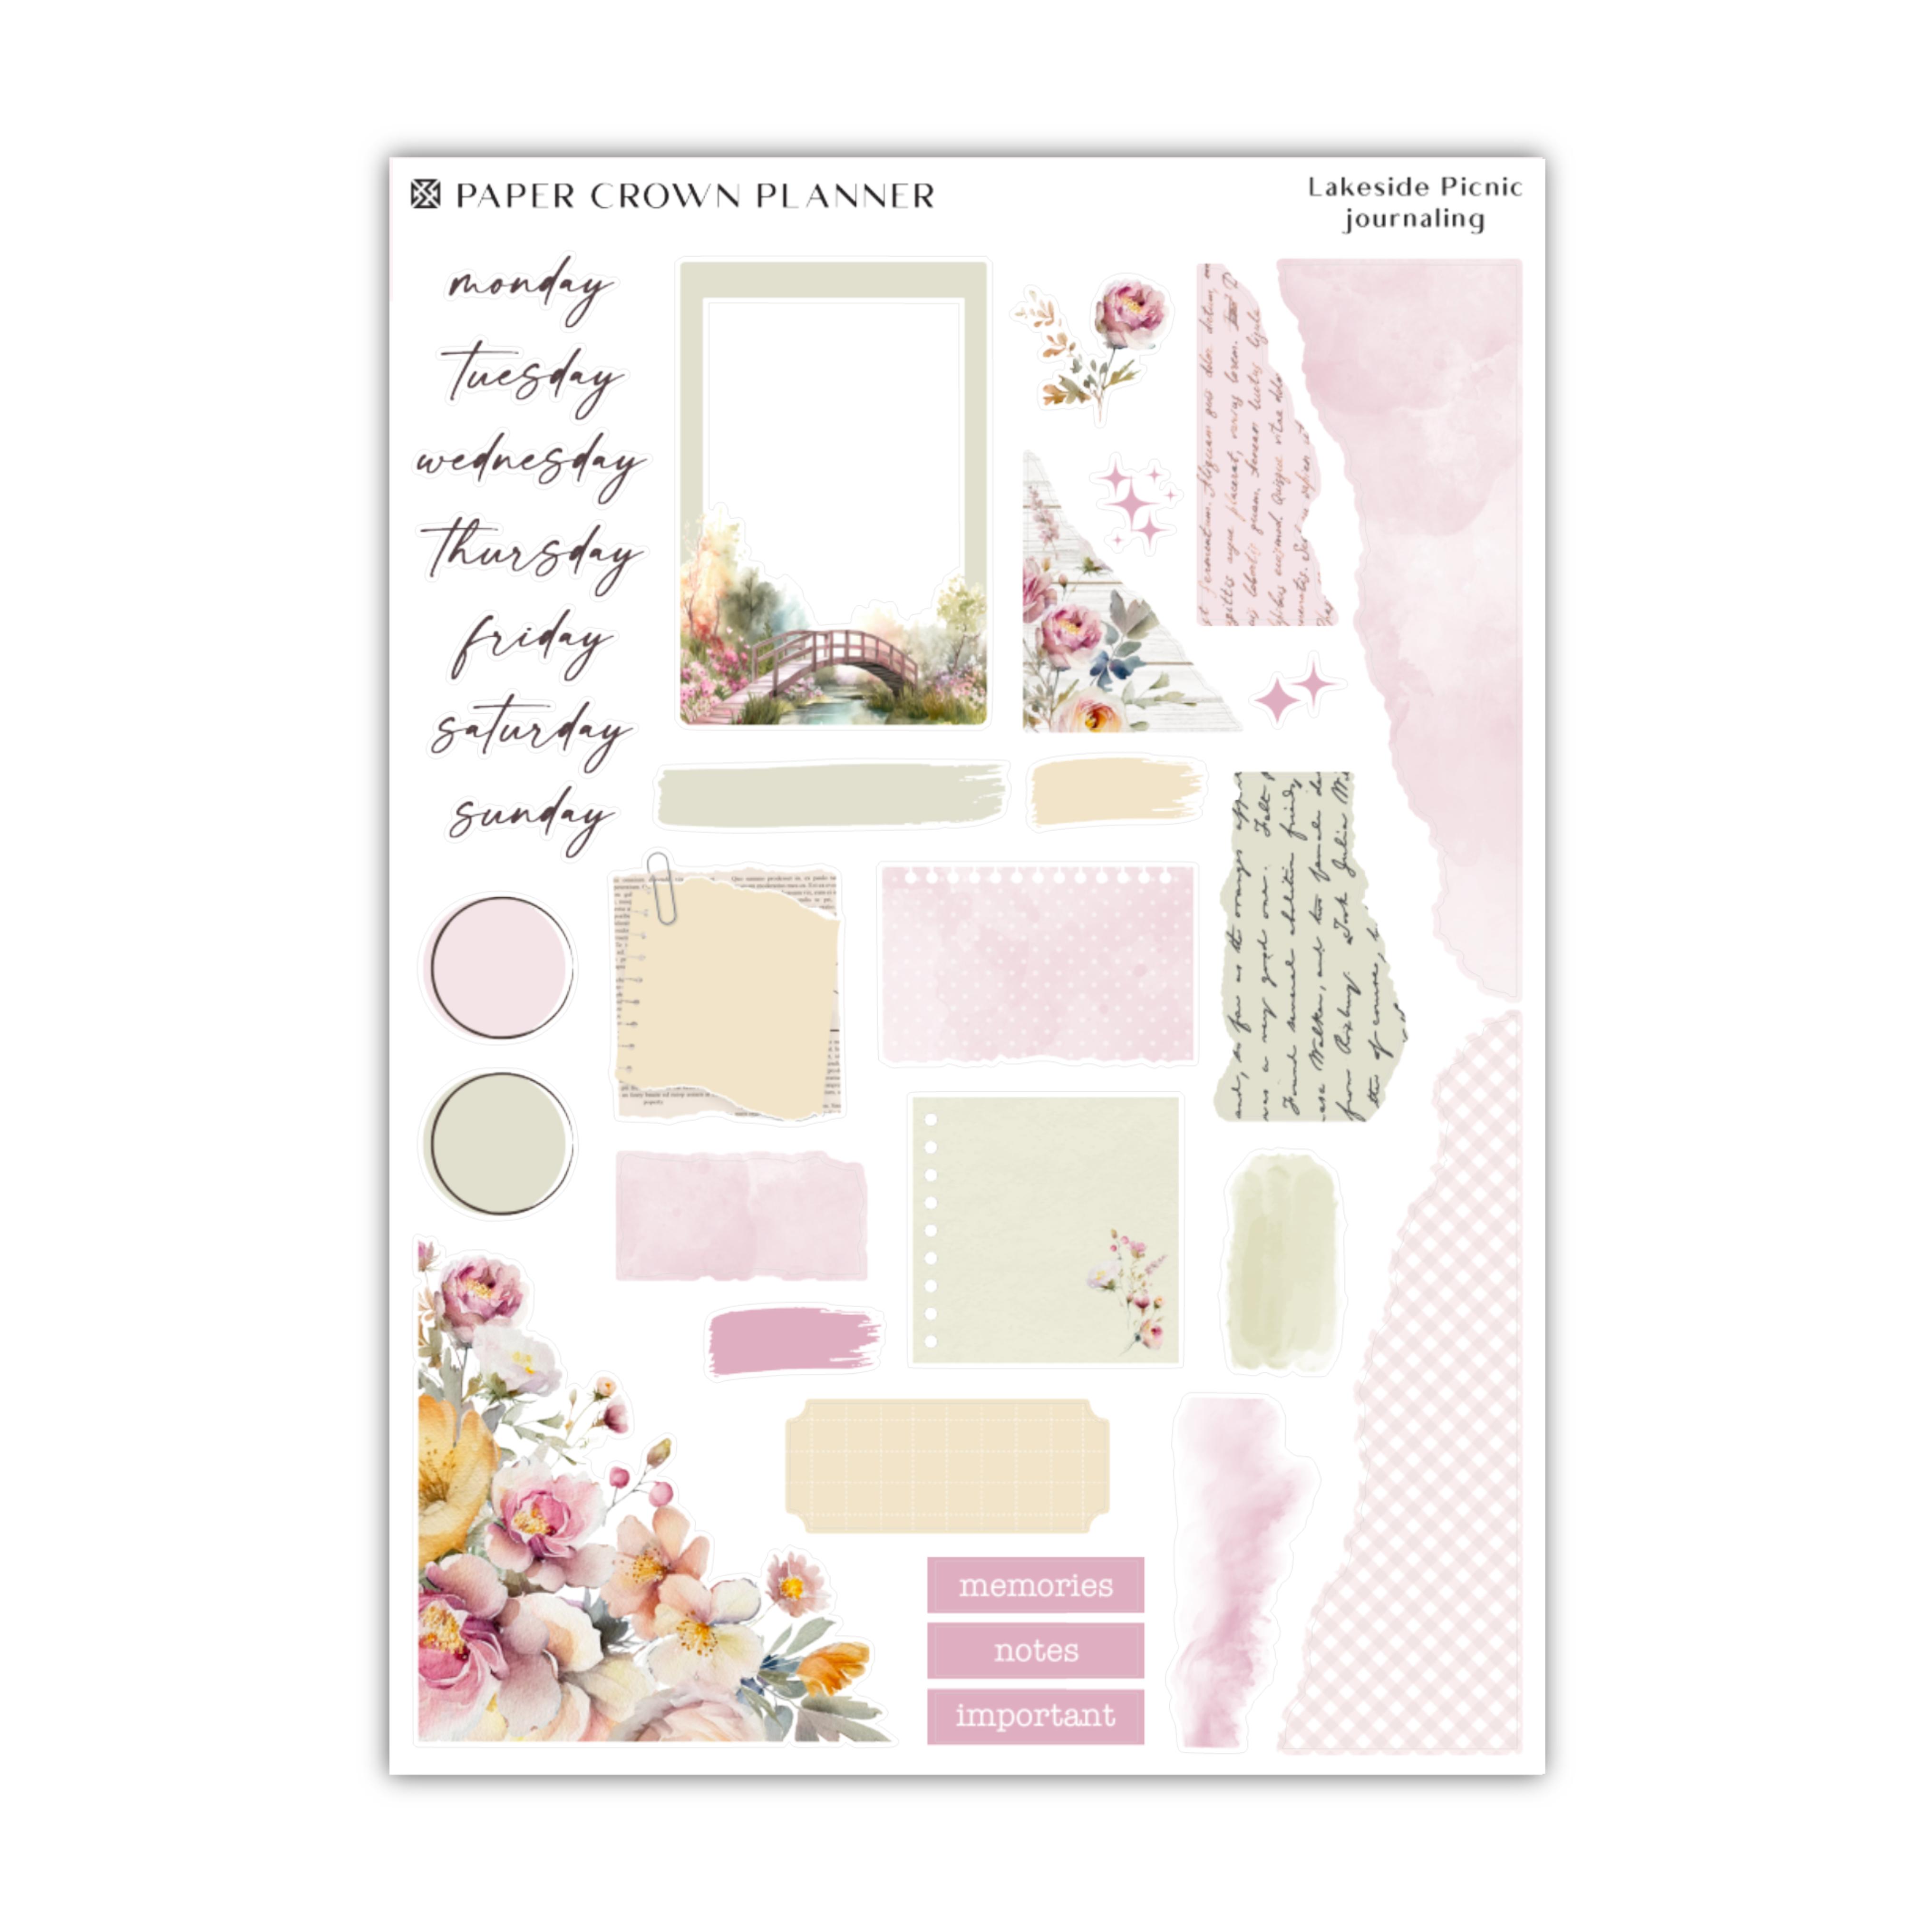 the paper crown planner stickers are pink and white